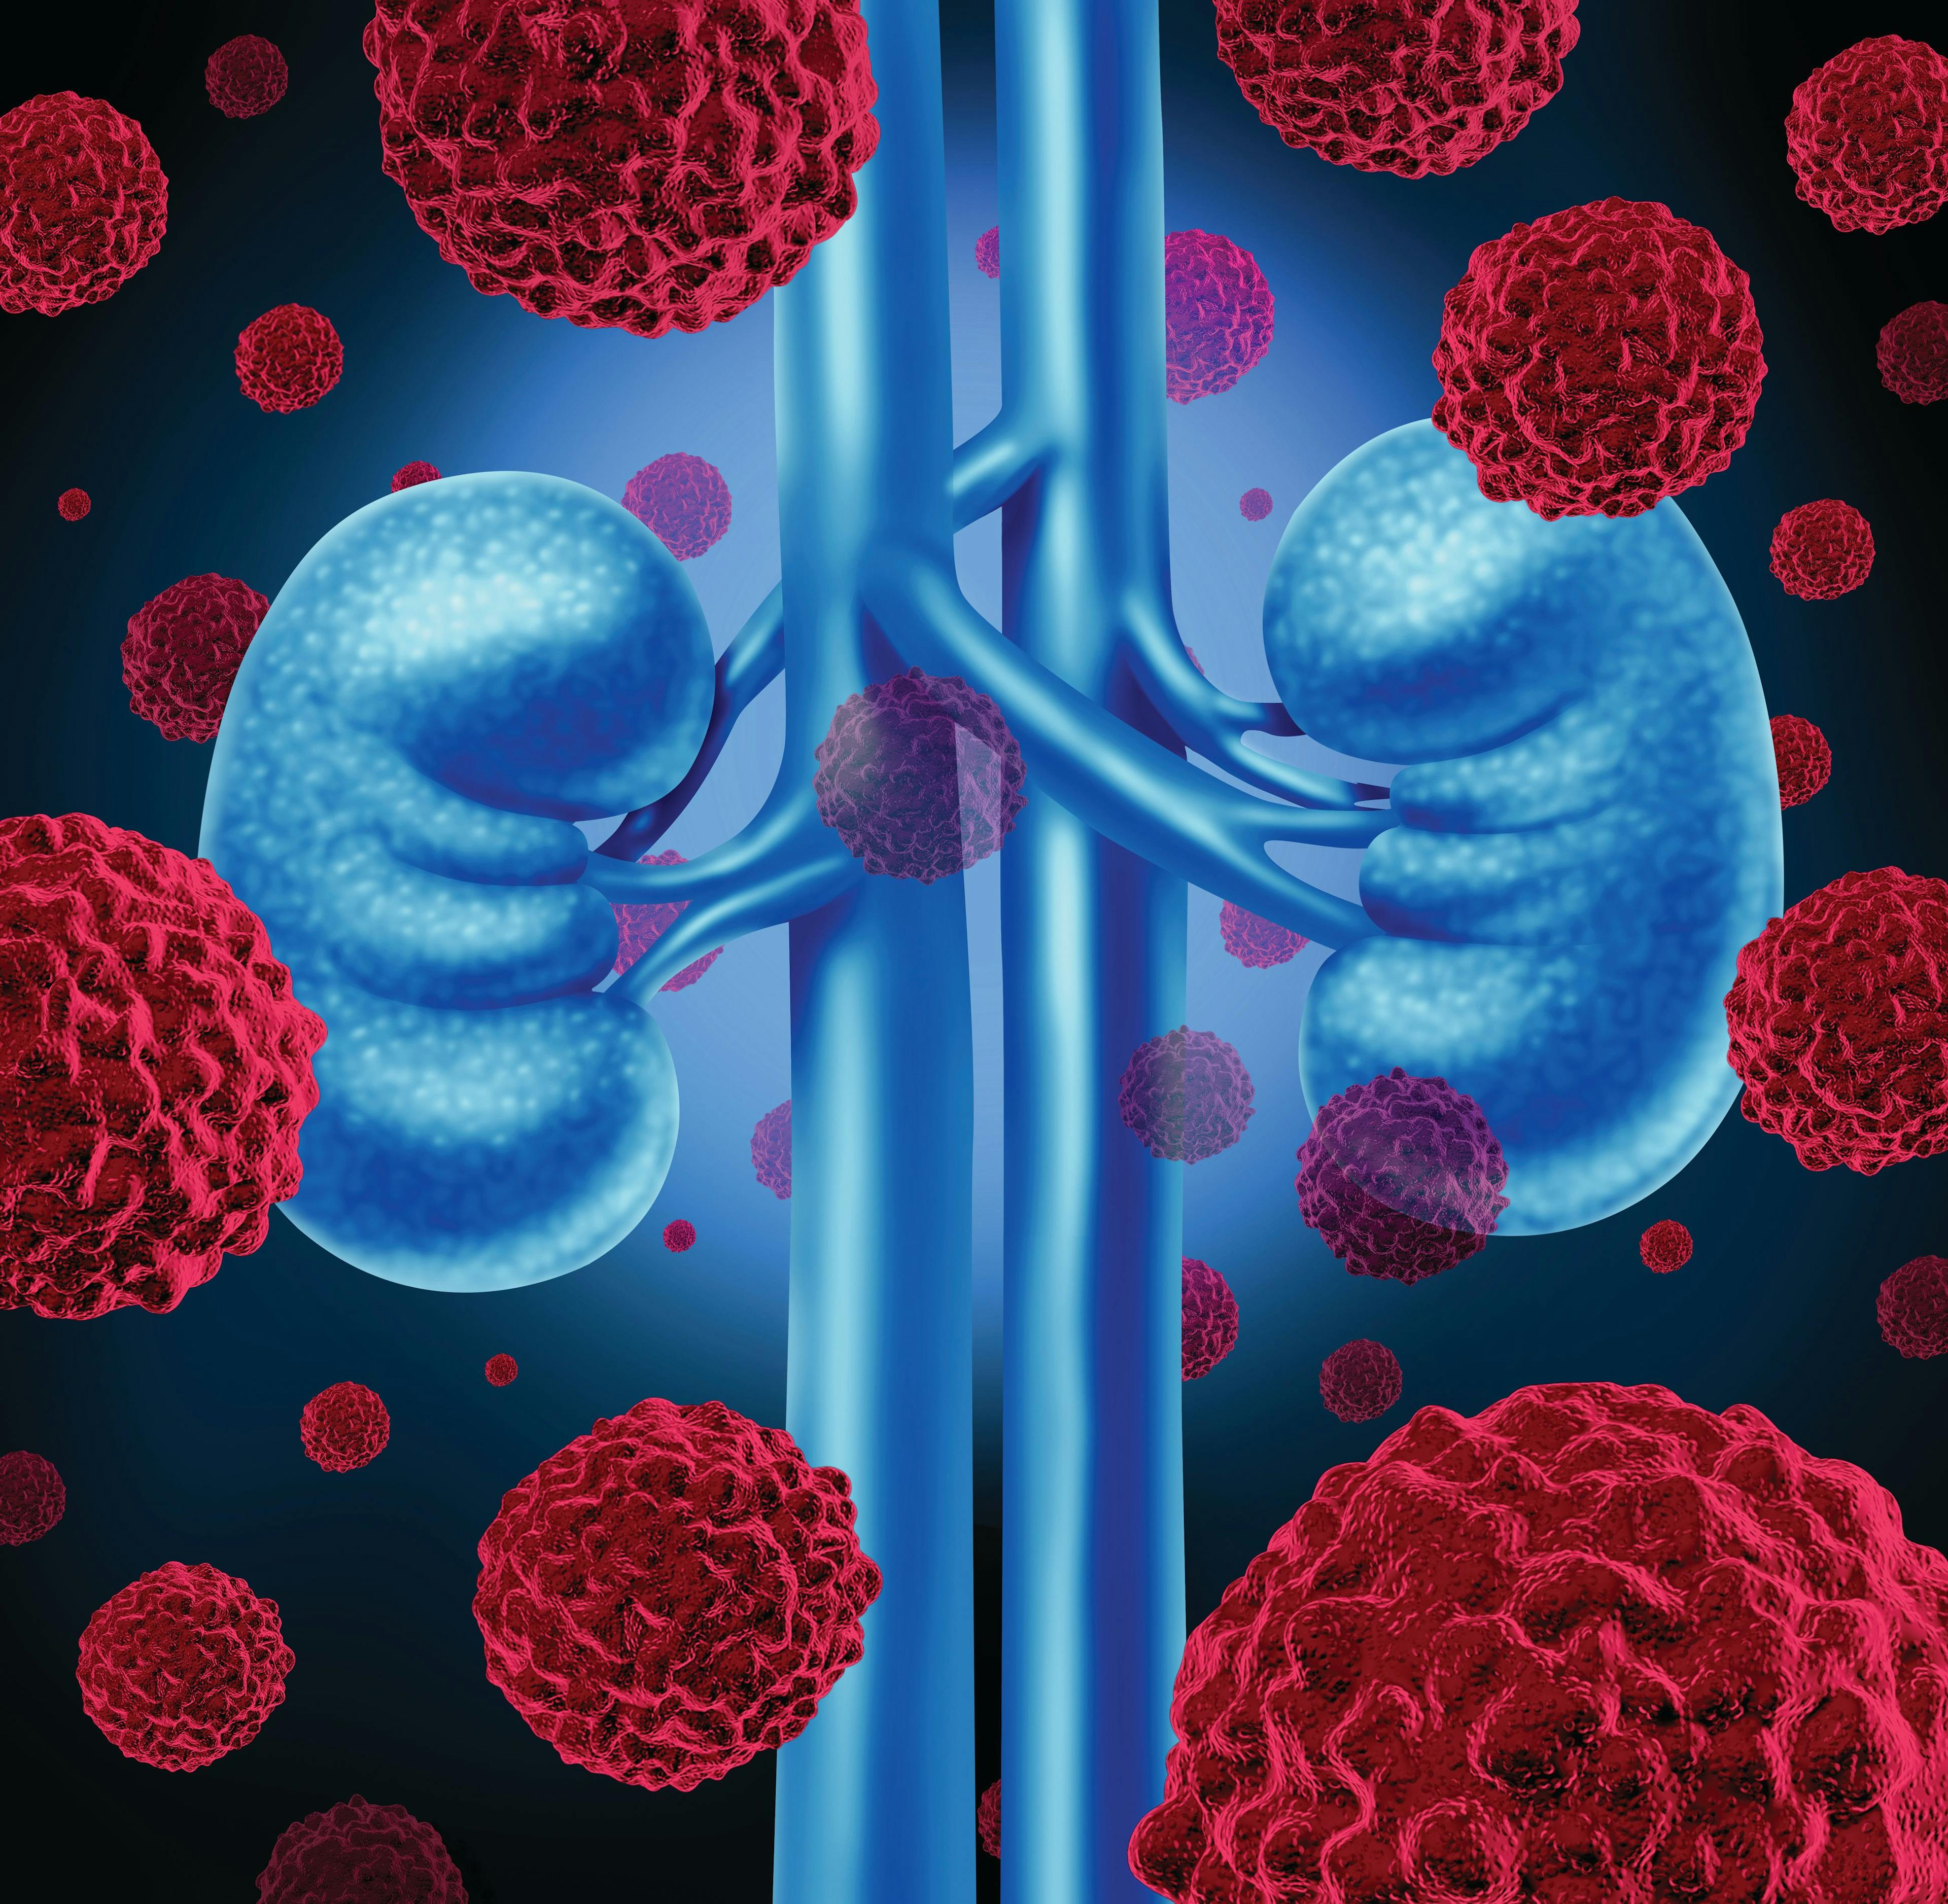 Iron Therapy May Help Broader Group of Patients With Kidney Disease